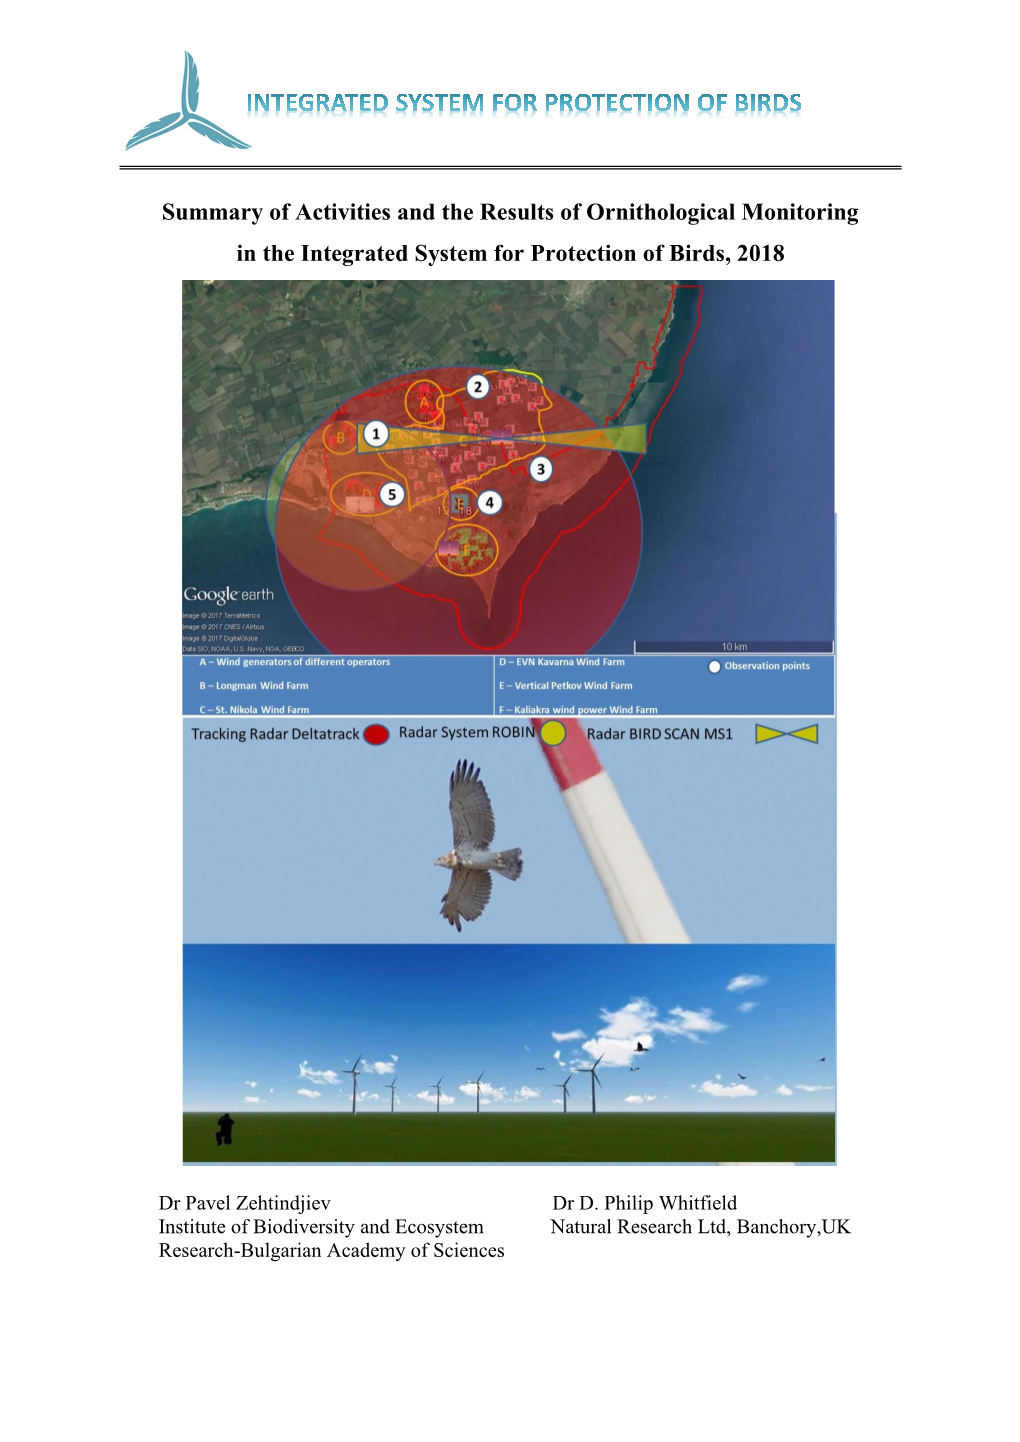 Summary of Activities and the Results of Ornithological Monitoring in the Integrated System for Protection of Birds, 2018